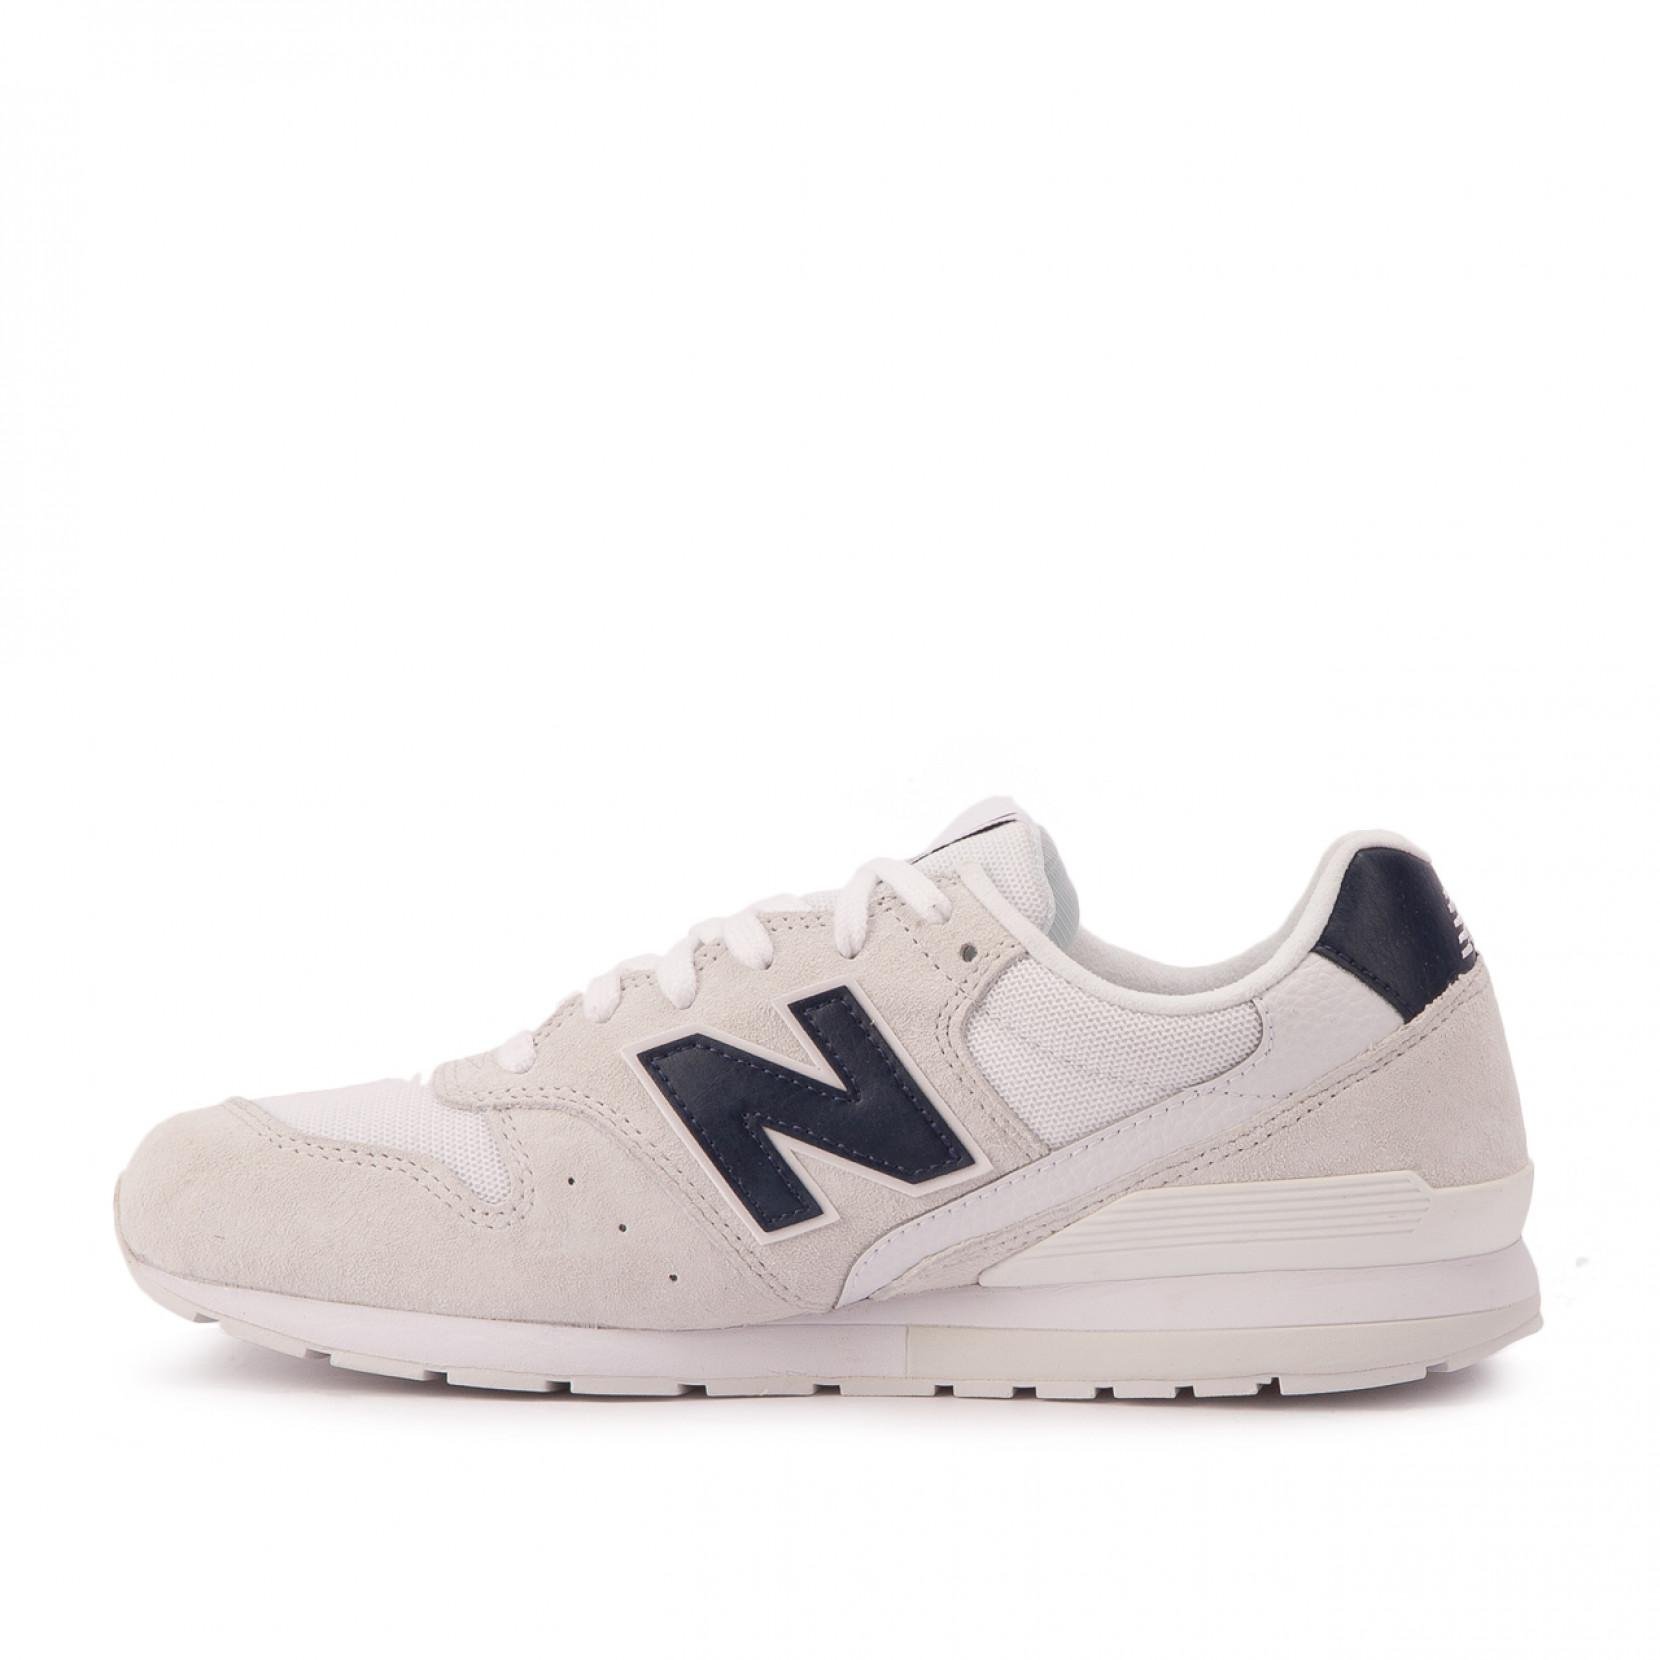 New Balance Suede Mrl 996 Jl Aviator Low-top sneakers in White for ...